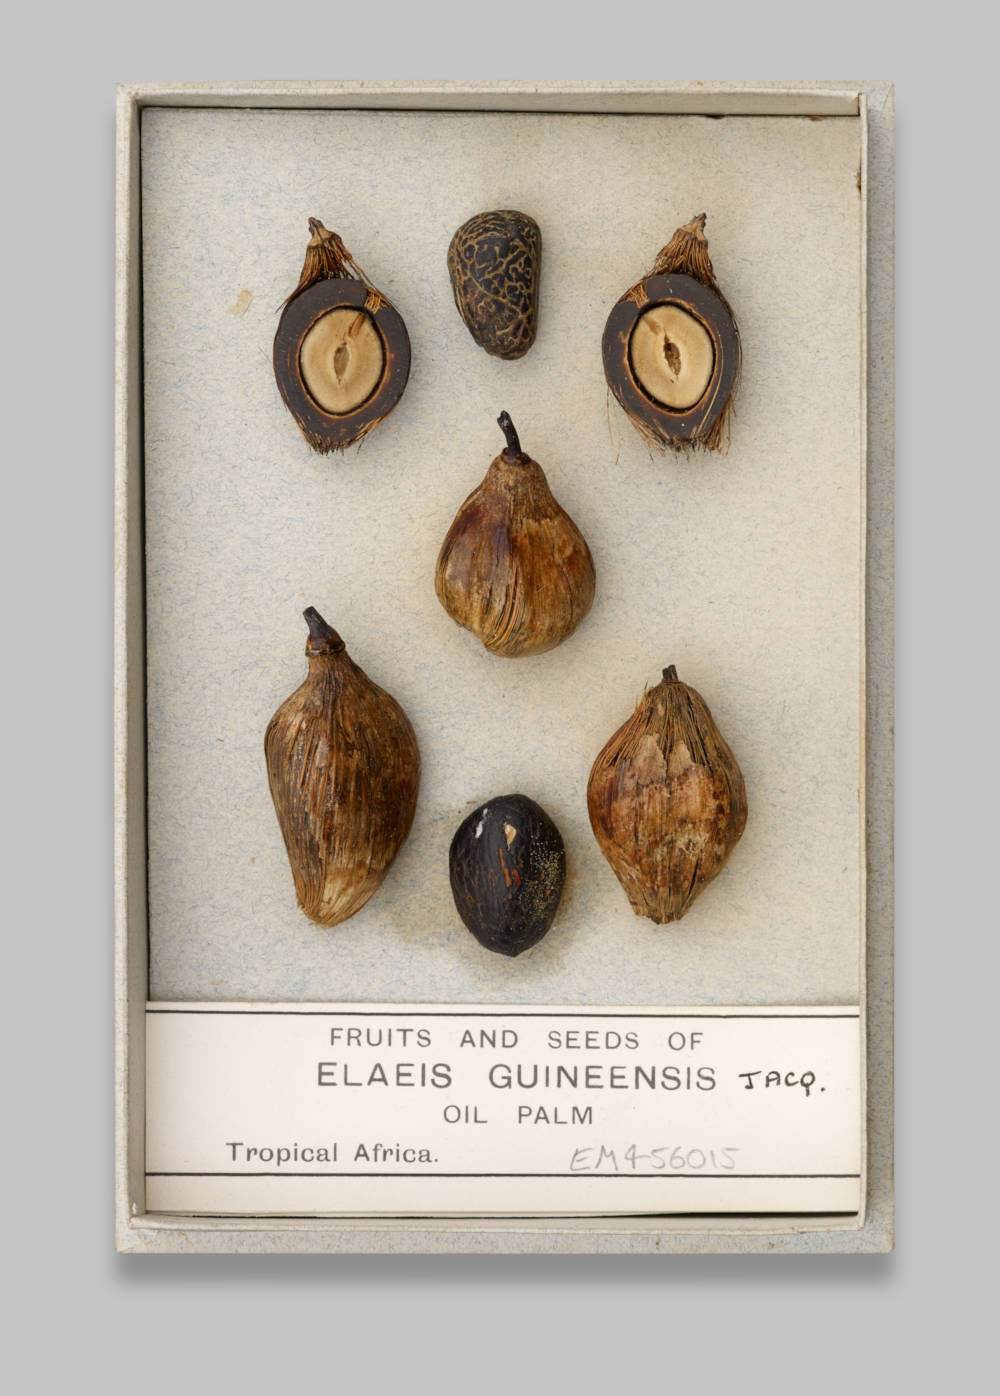 Oil palm seeds Gallery Image